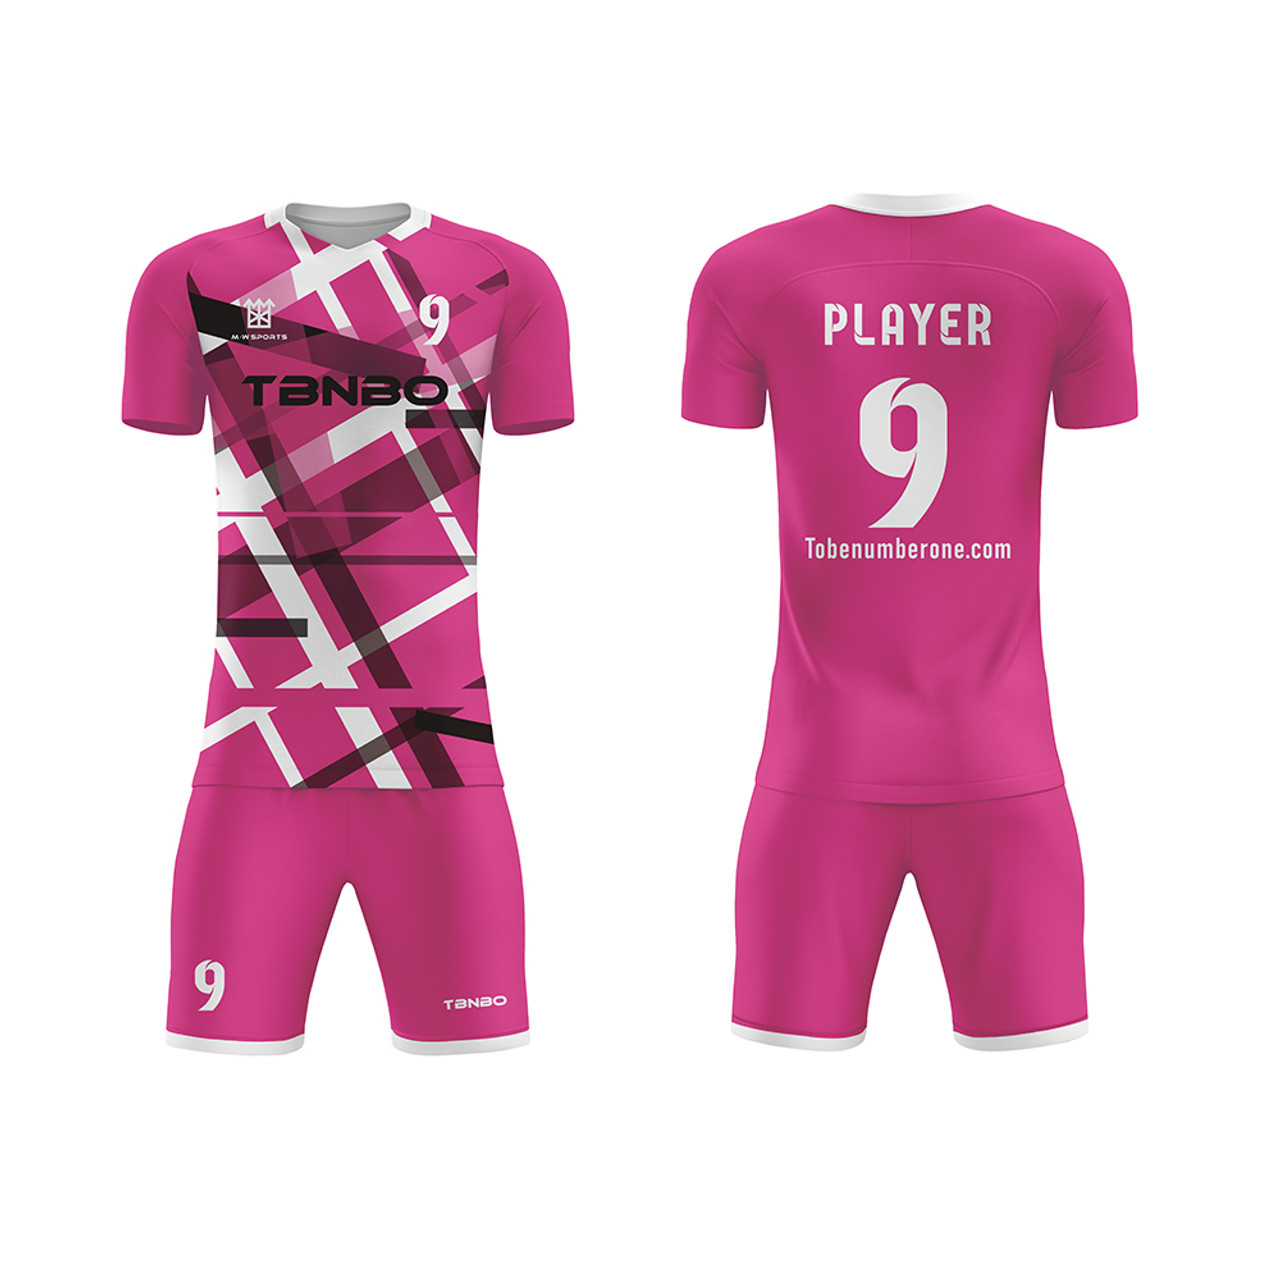 Sublimation Soccer Jerseys Red Striped Design Full Kits Shirts And Shorts  For Women Wholesale